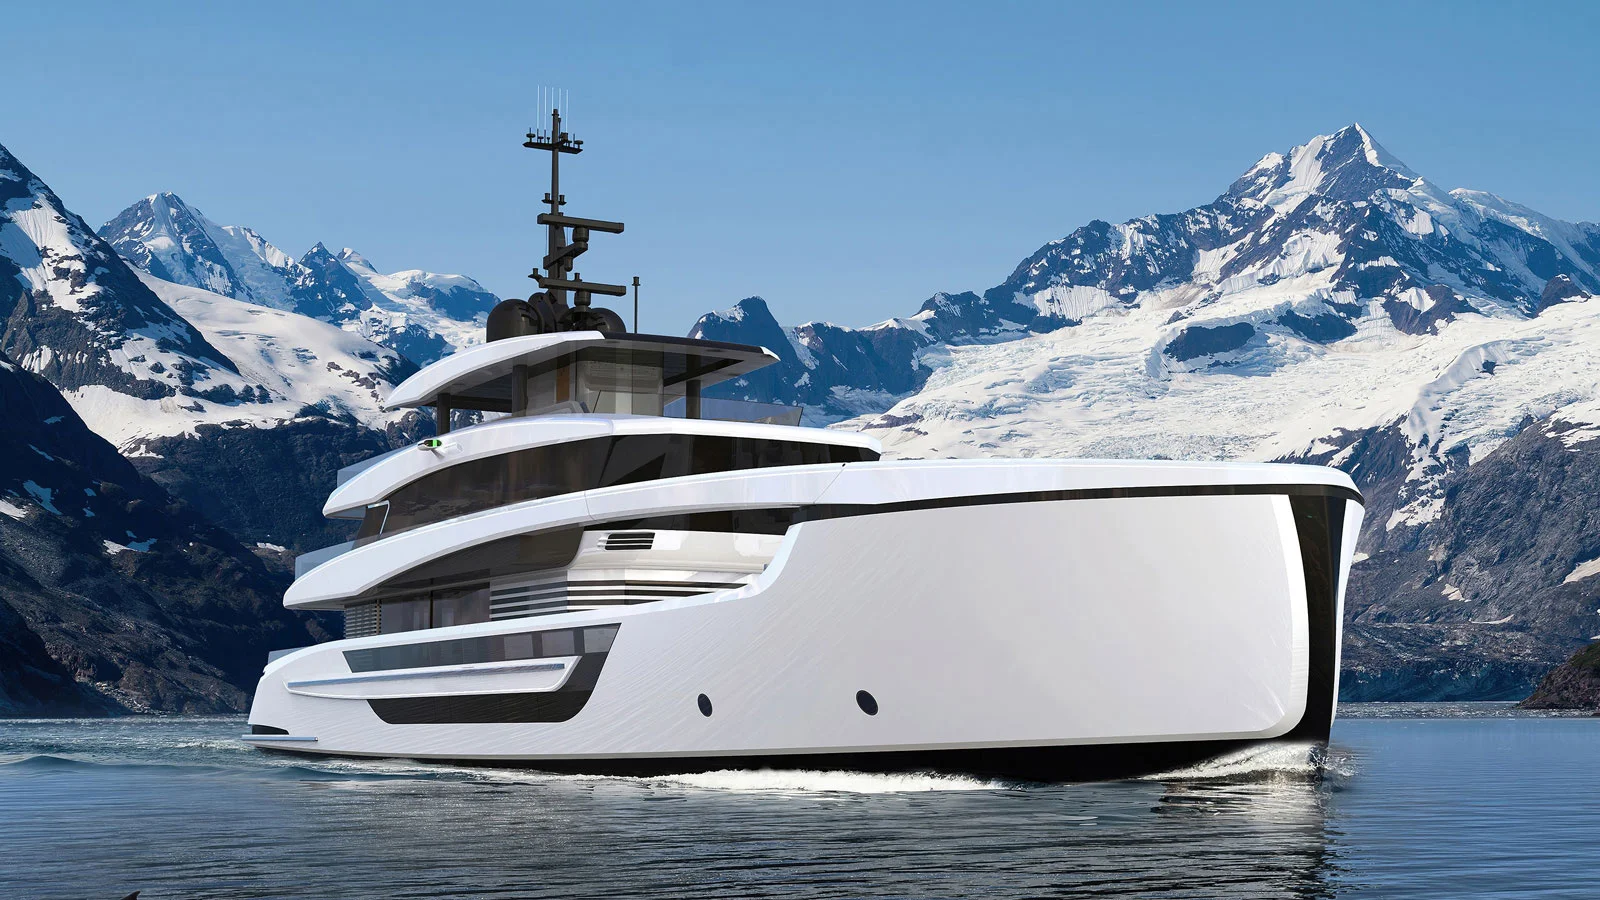 The exterior and interior of the yacht were crafted by De Basto Designs studio